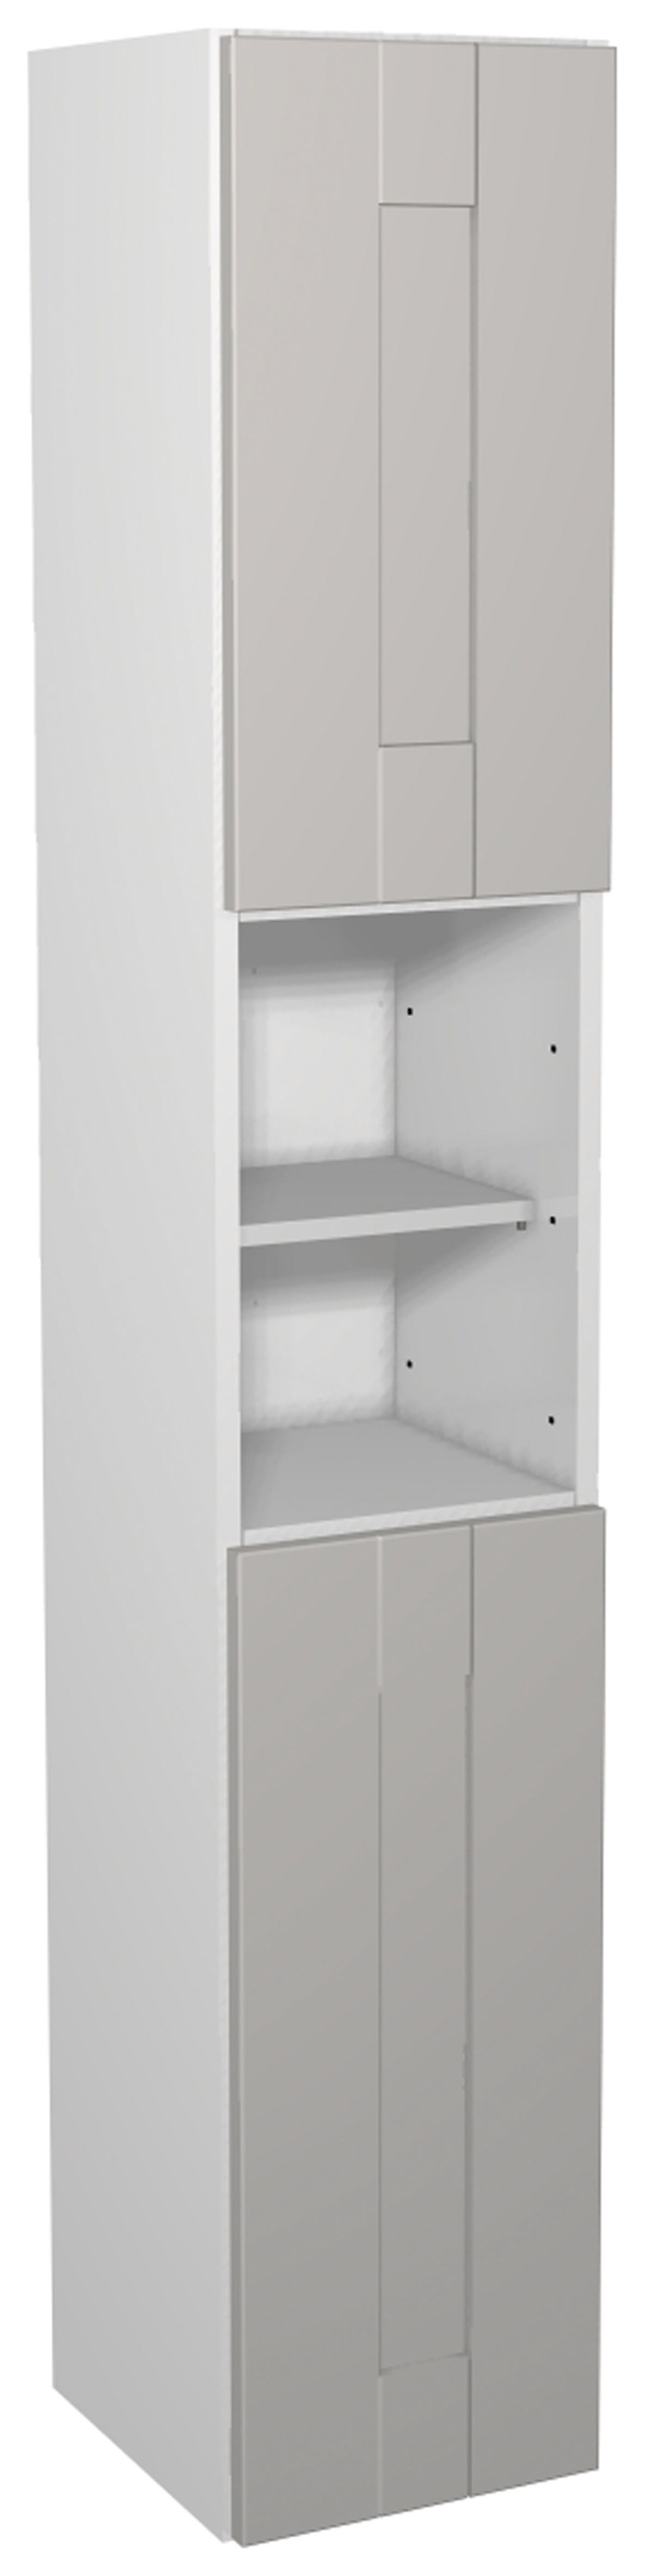 Image of Wickes Vermont Grey Tower Unit - 300 x 1762mm